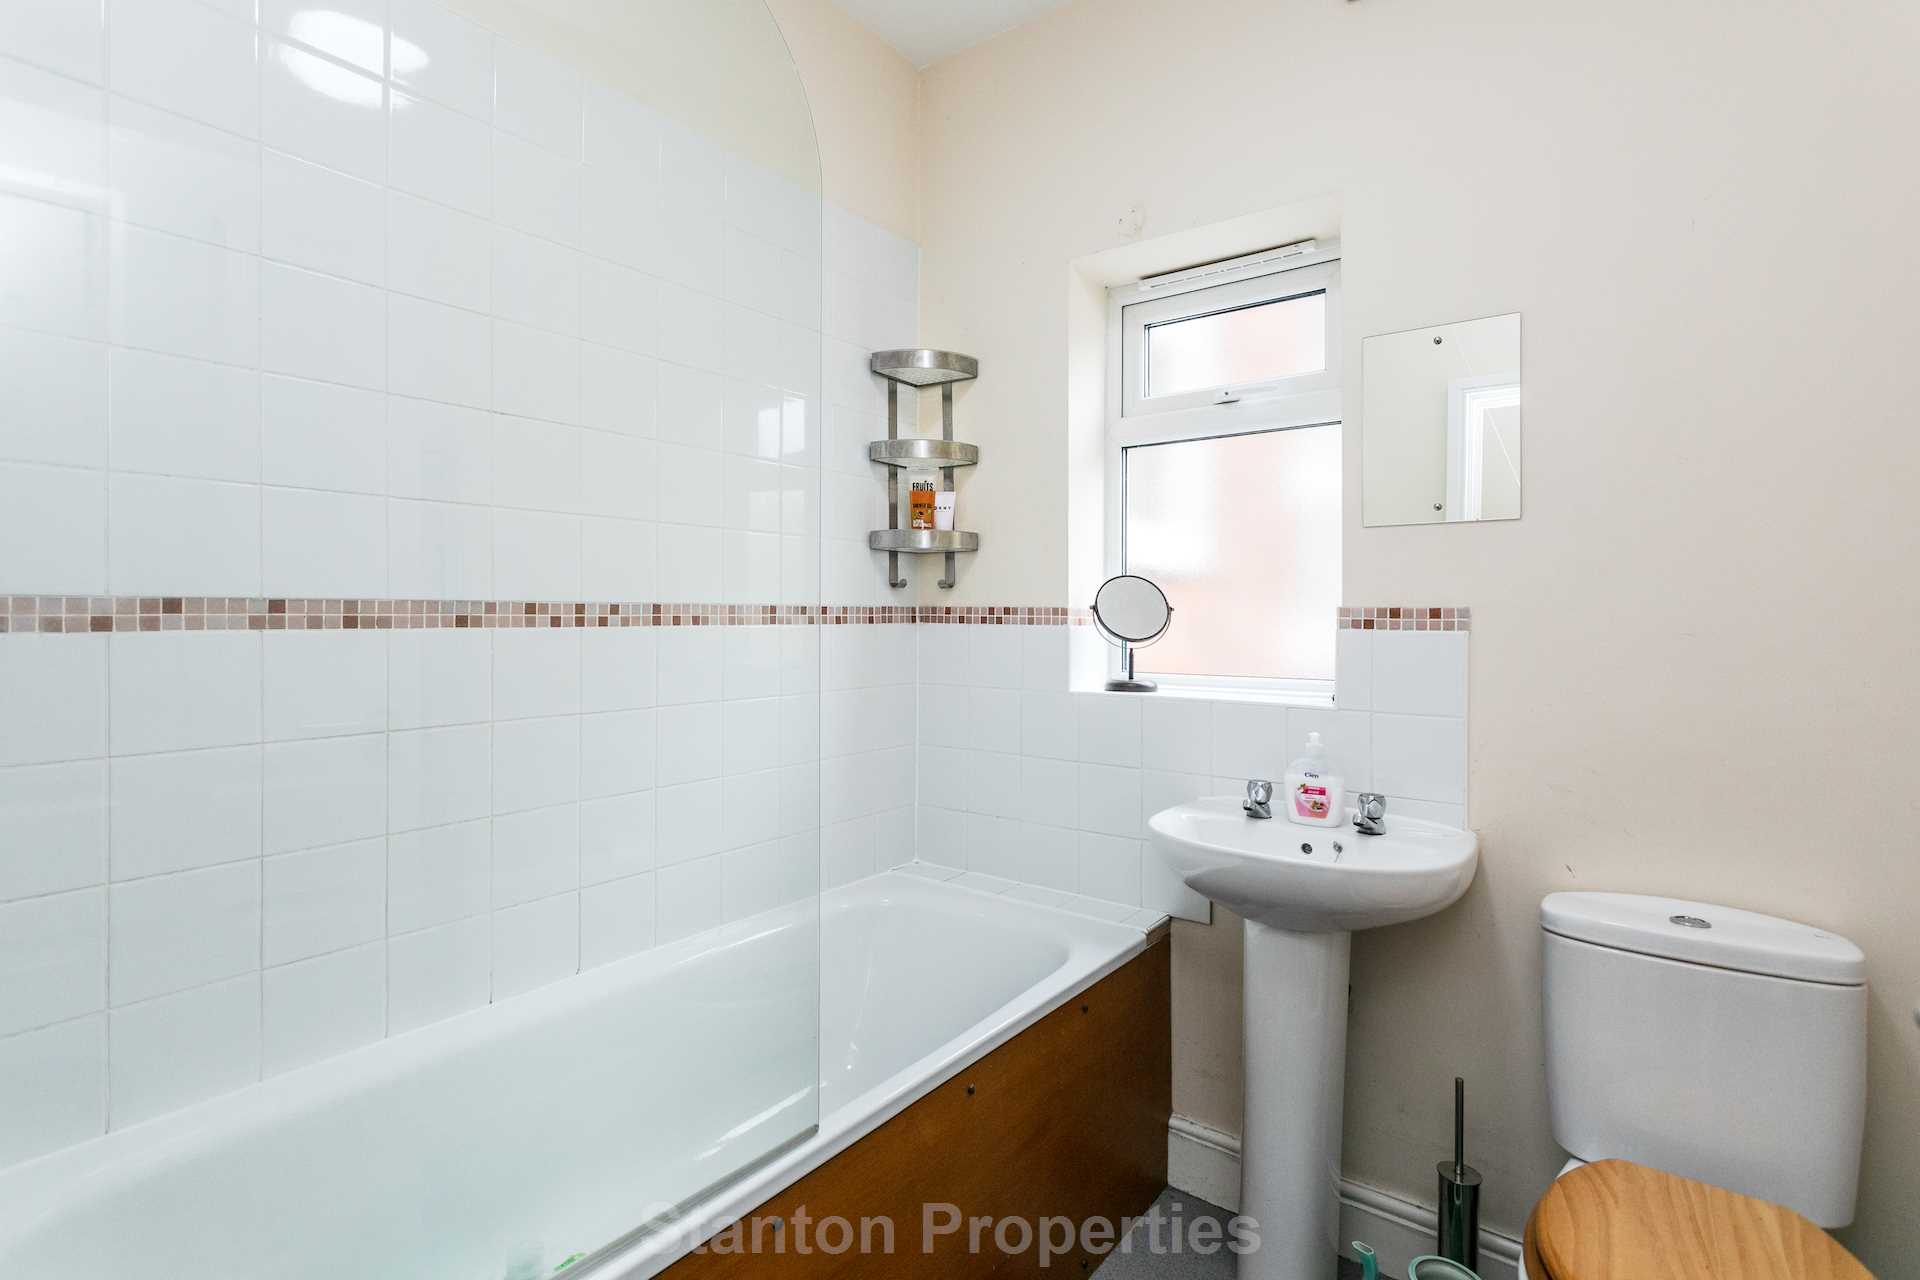 £112 pppw, Wallace Avenue, Rusholme, Image 16